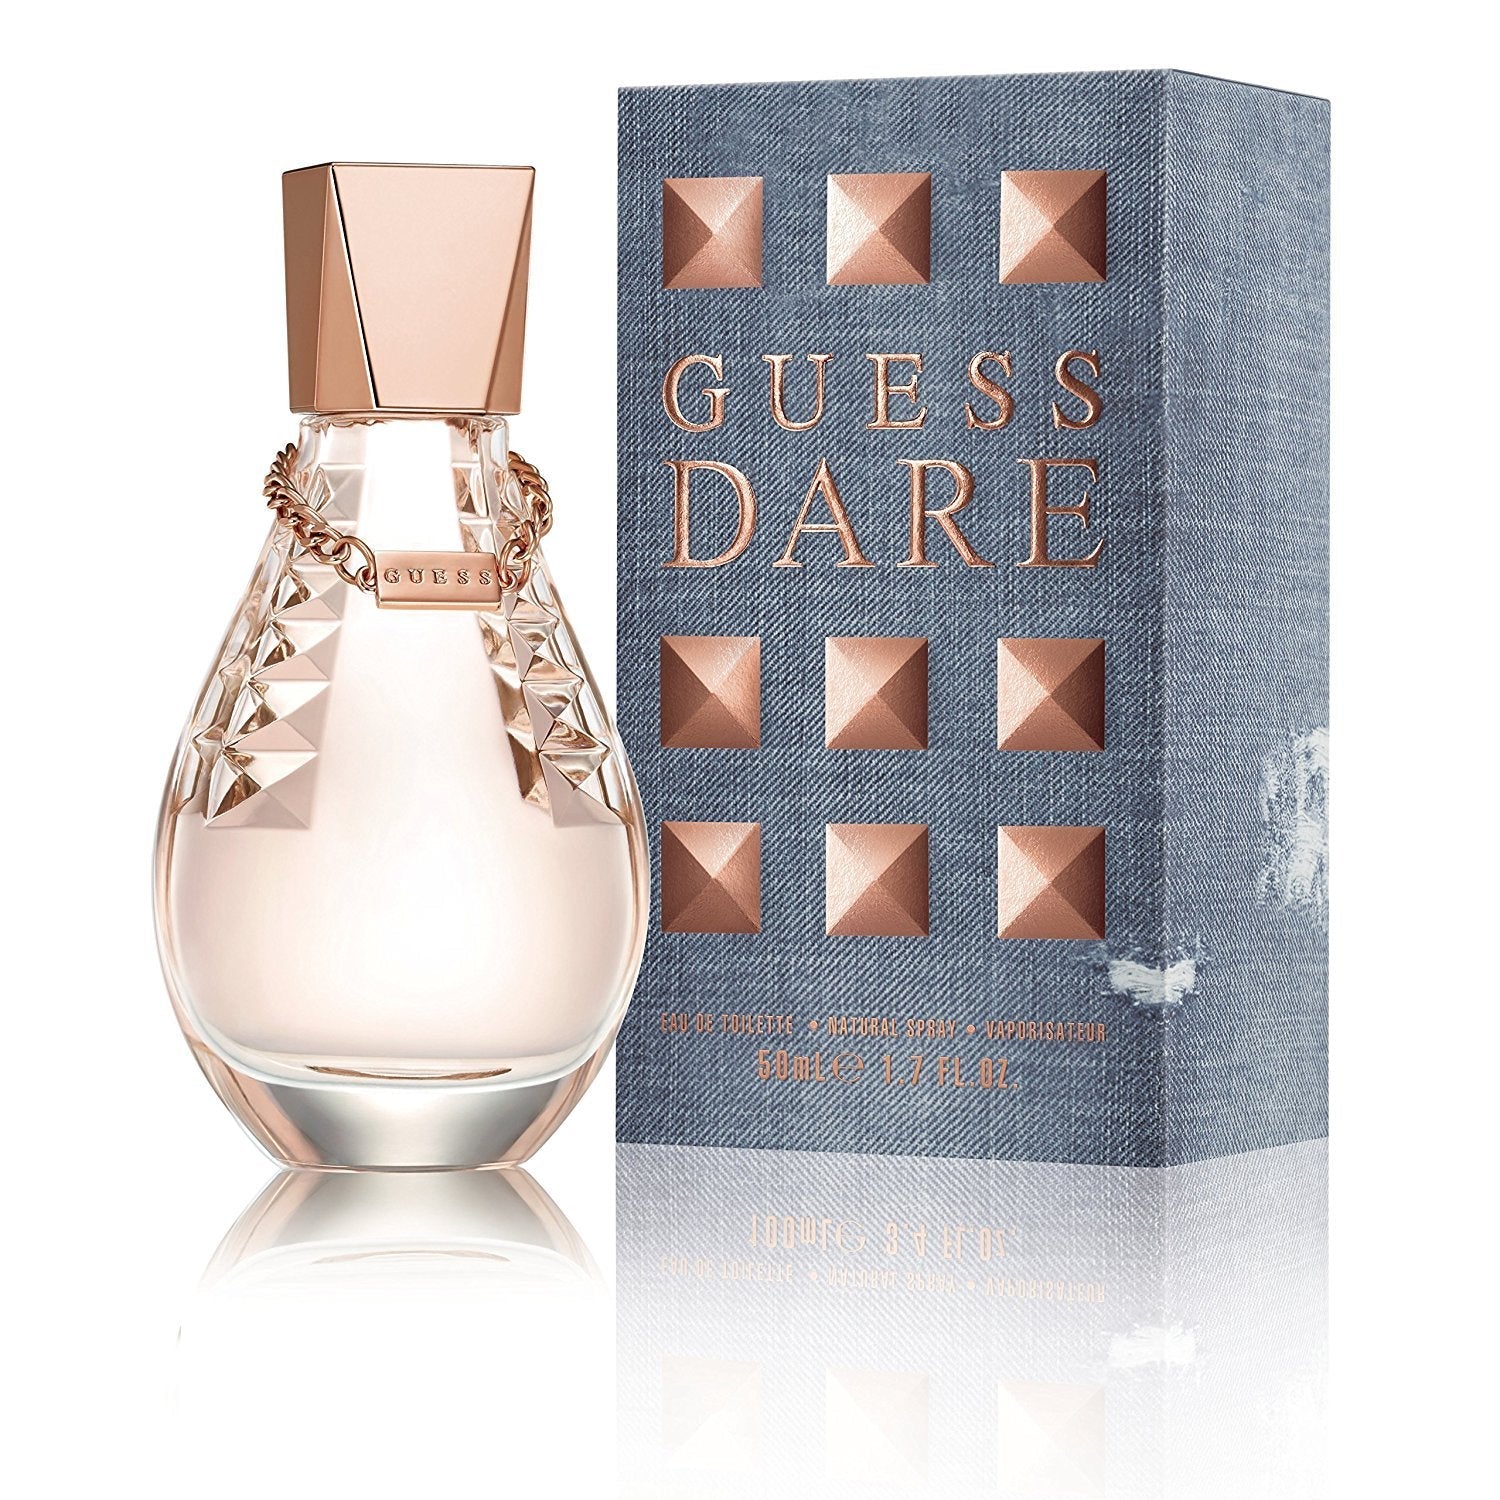 Guess Dare EDT For Women | My Perfume Shop Australia